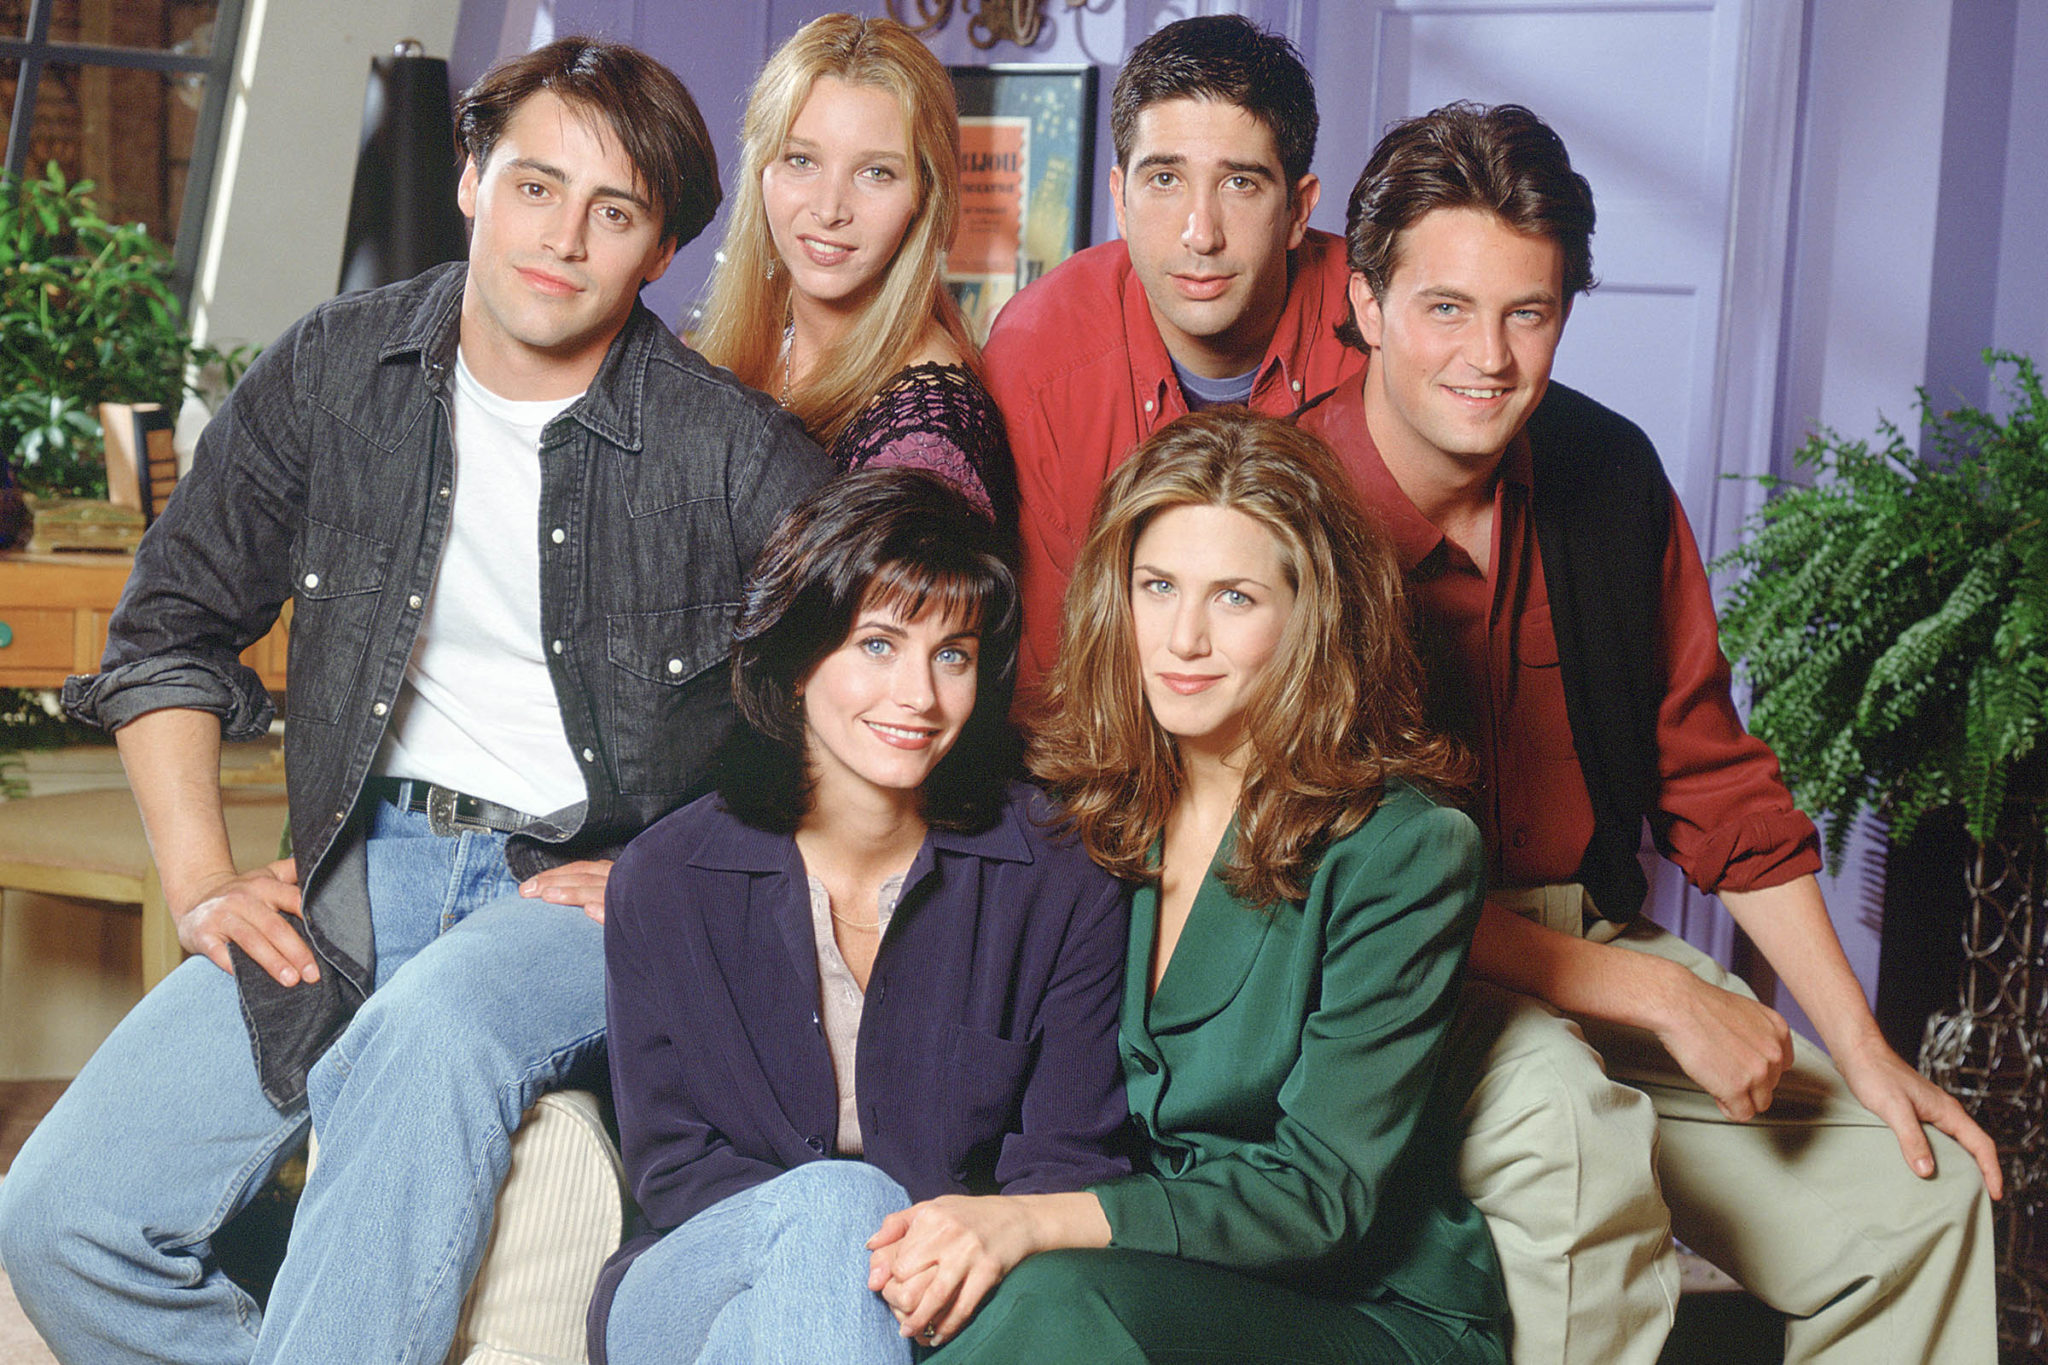 Friends Cast Could Get More Than 2 Million Each for R...